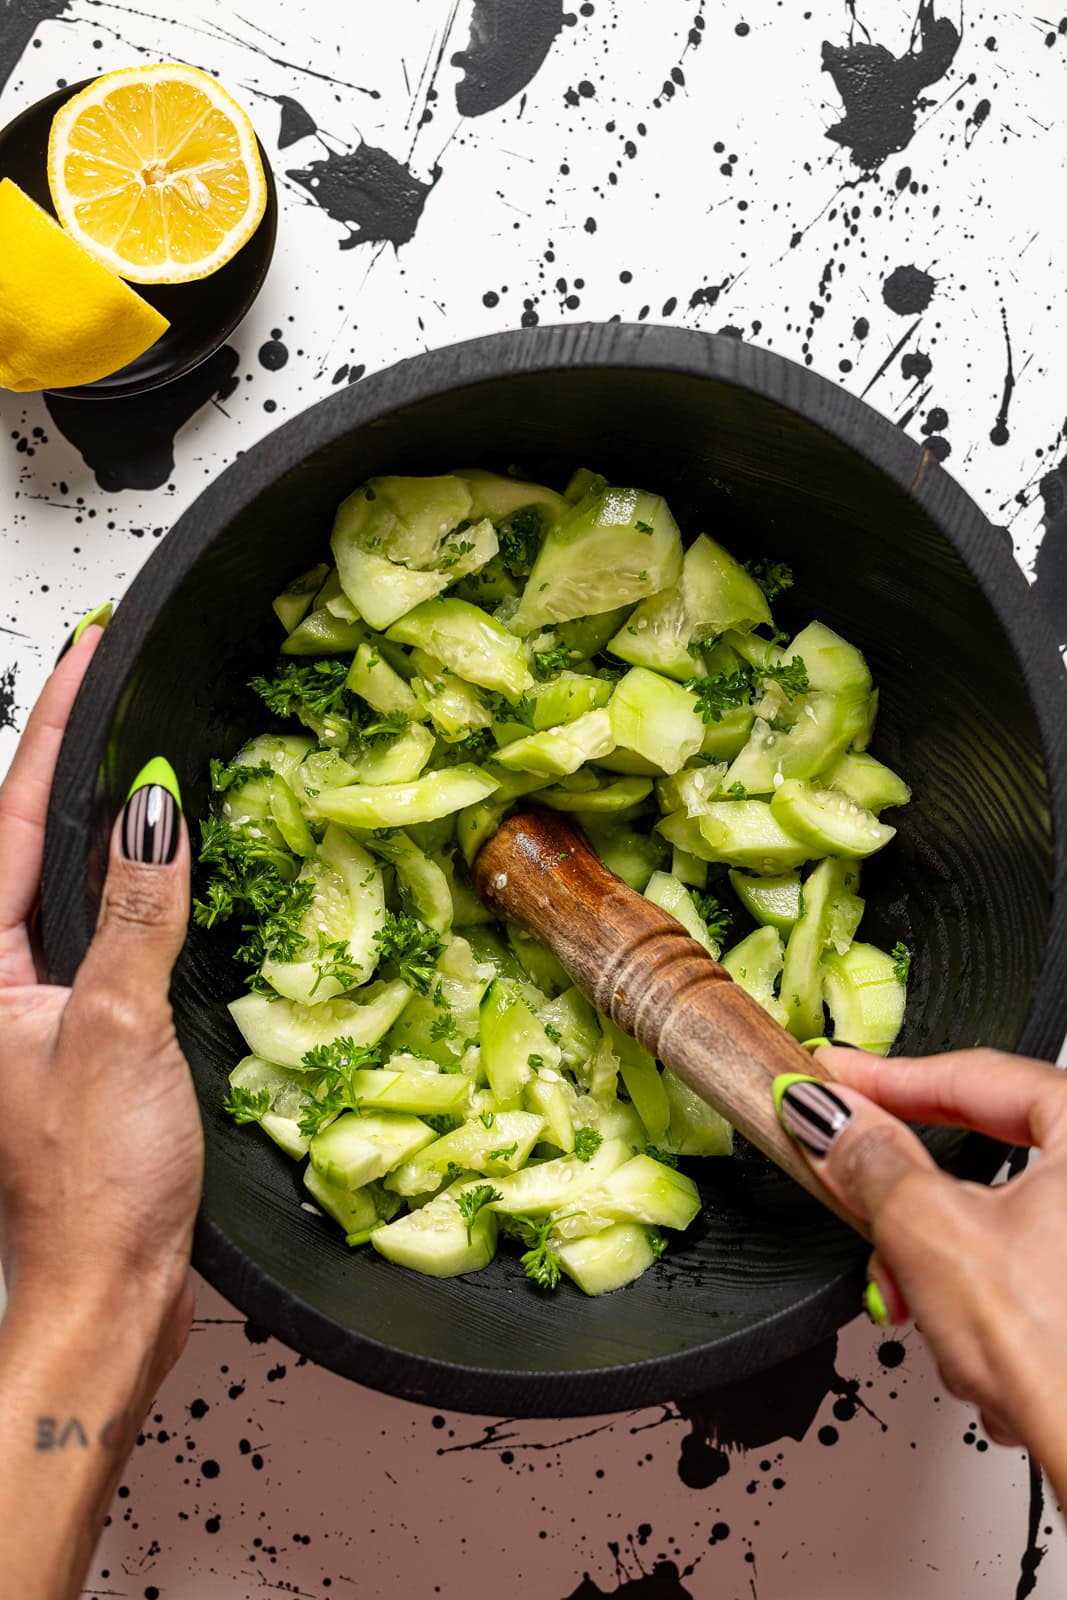 Cucumbers being mashed in a black bowl with a wooden muller.